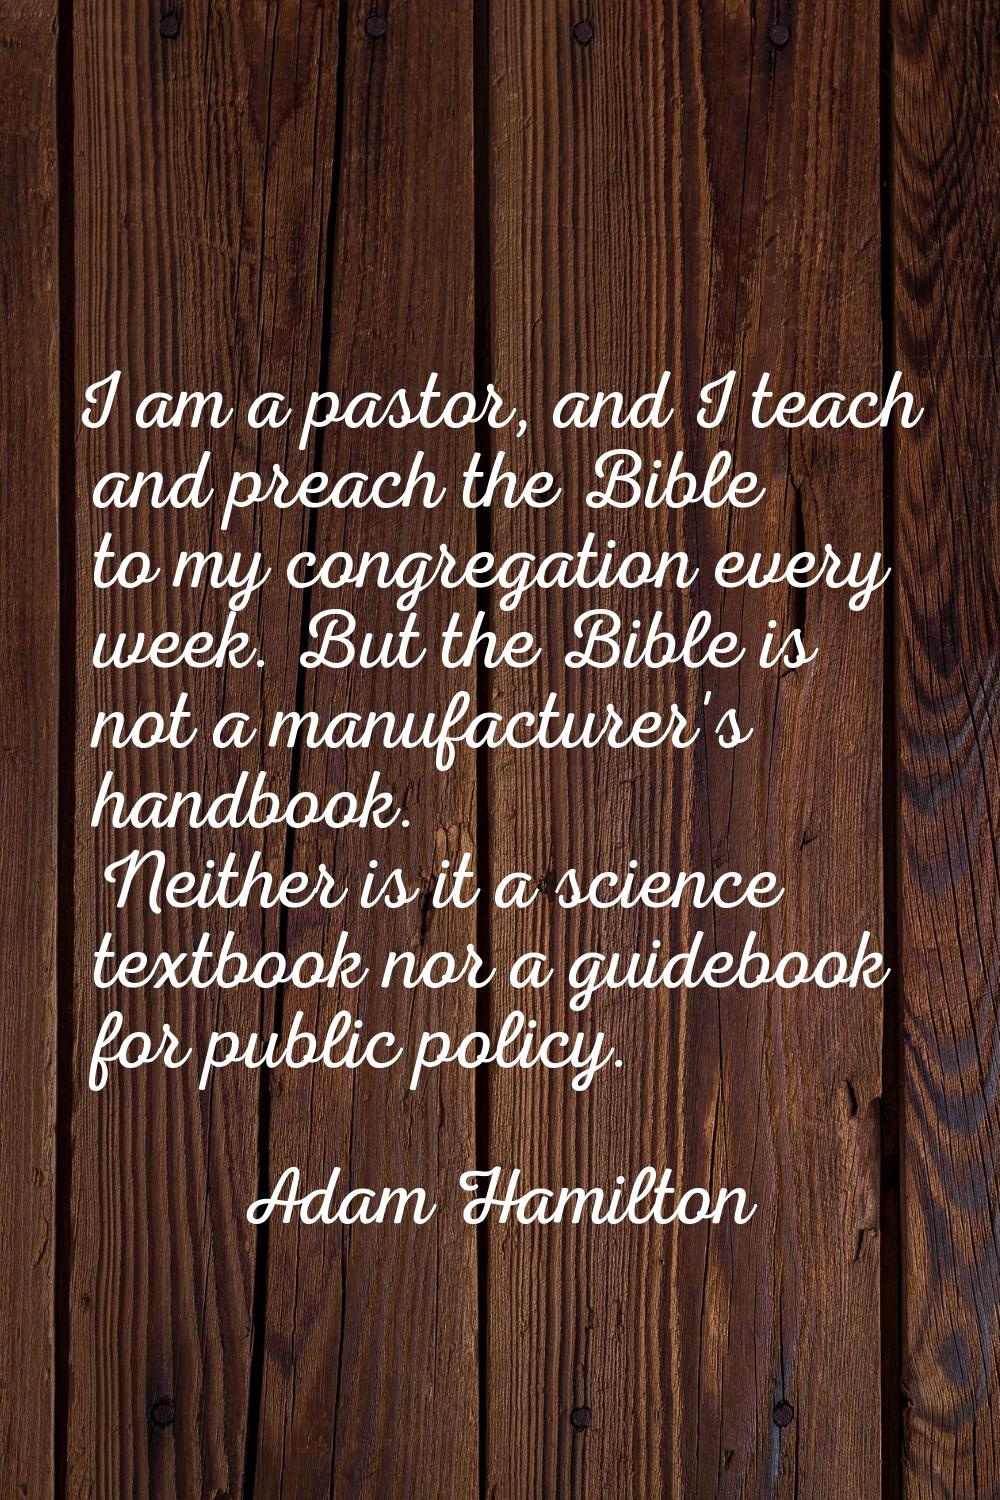 I am a pastor, and I teach and preach the Bible to my congregation every week. But the Bible is not